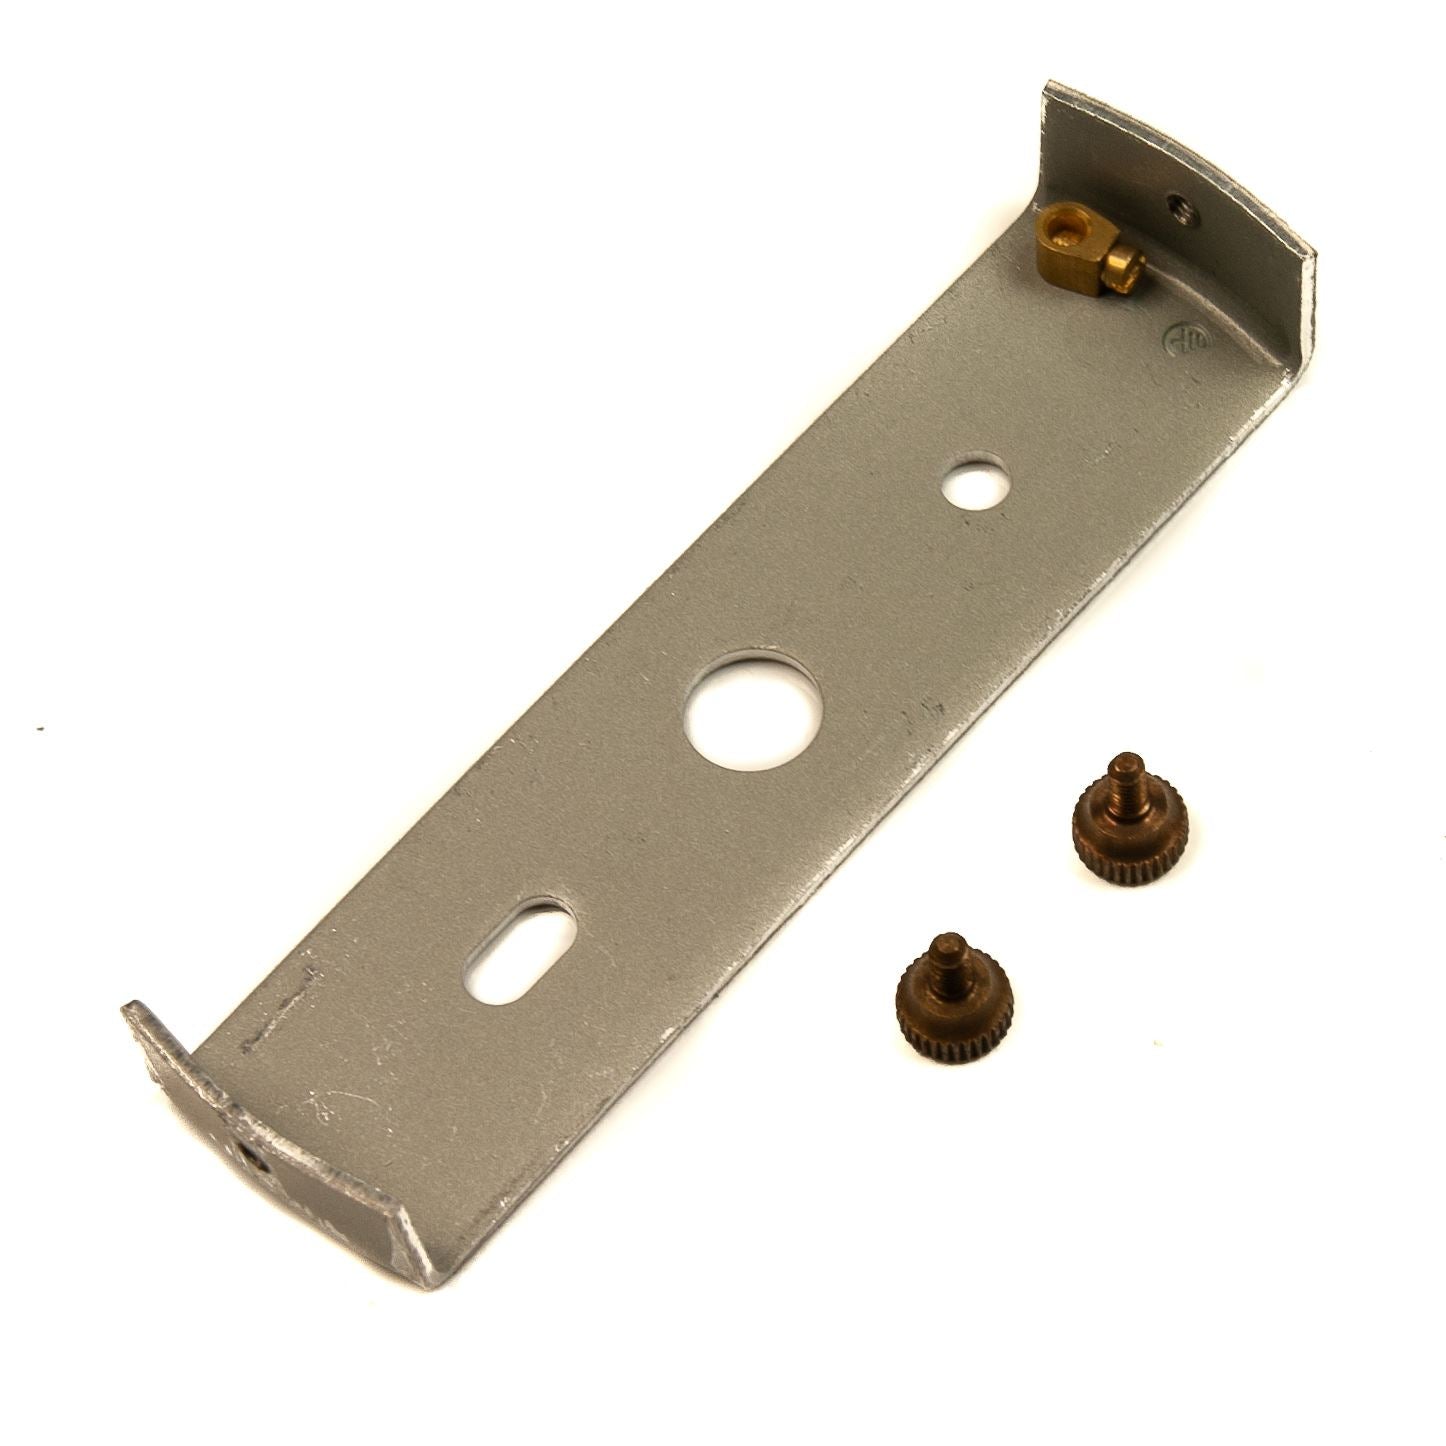 Lighting Fixture Ceiling Plate Bracket Plate Earthed 100mm Old English Screws - Thunderfix Hardware